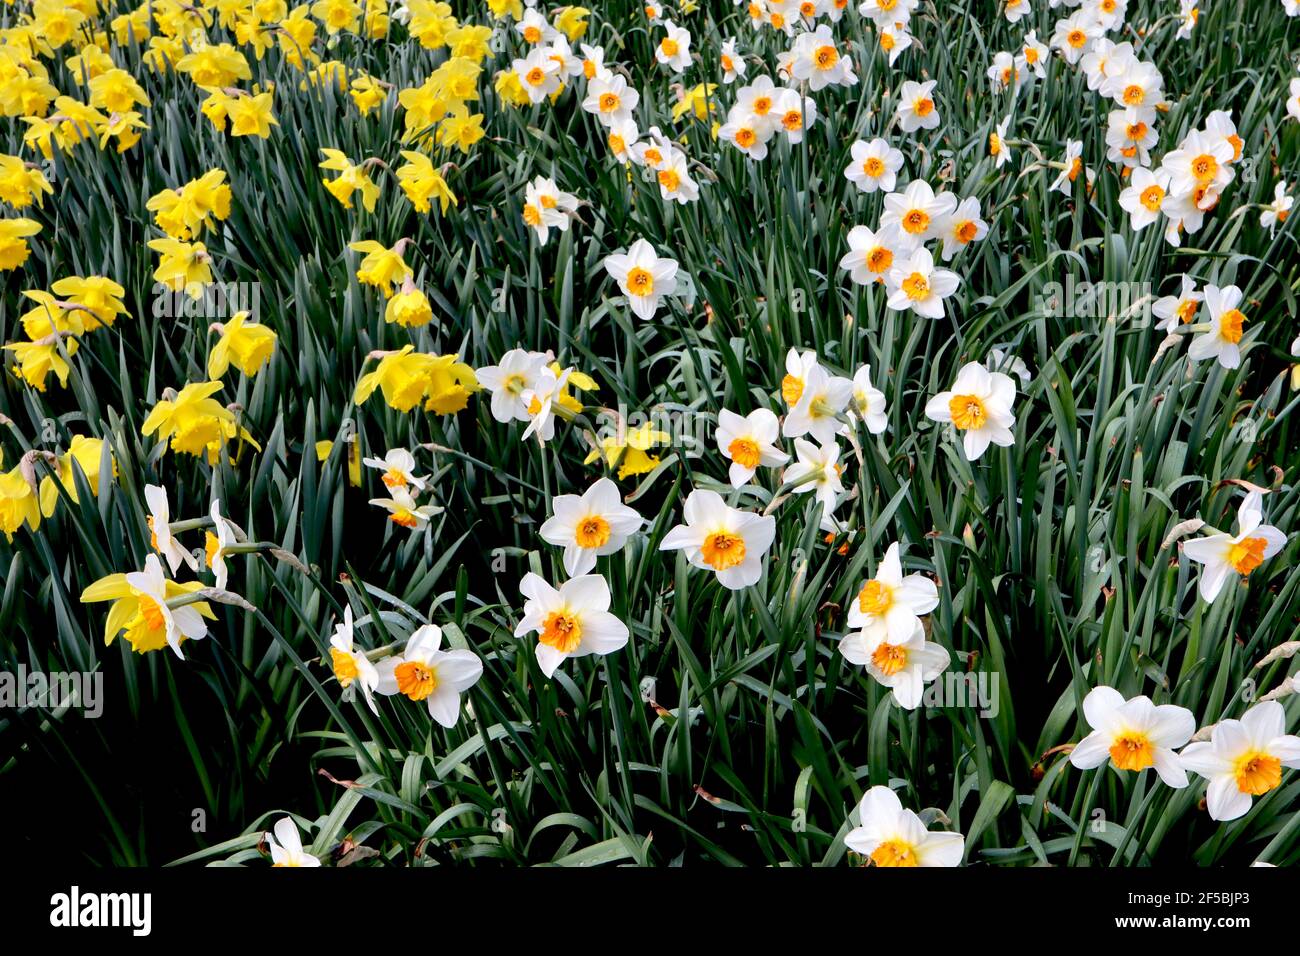 Narcissus / Daffodil ‘Barrett Browning’ Narcissus / Daffodil ‘Dutch Master’ March, Angleterre, Royaume-Uni Banque D'Images